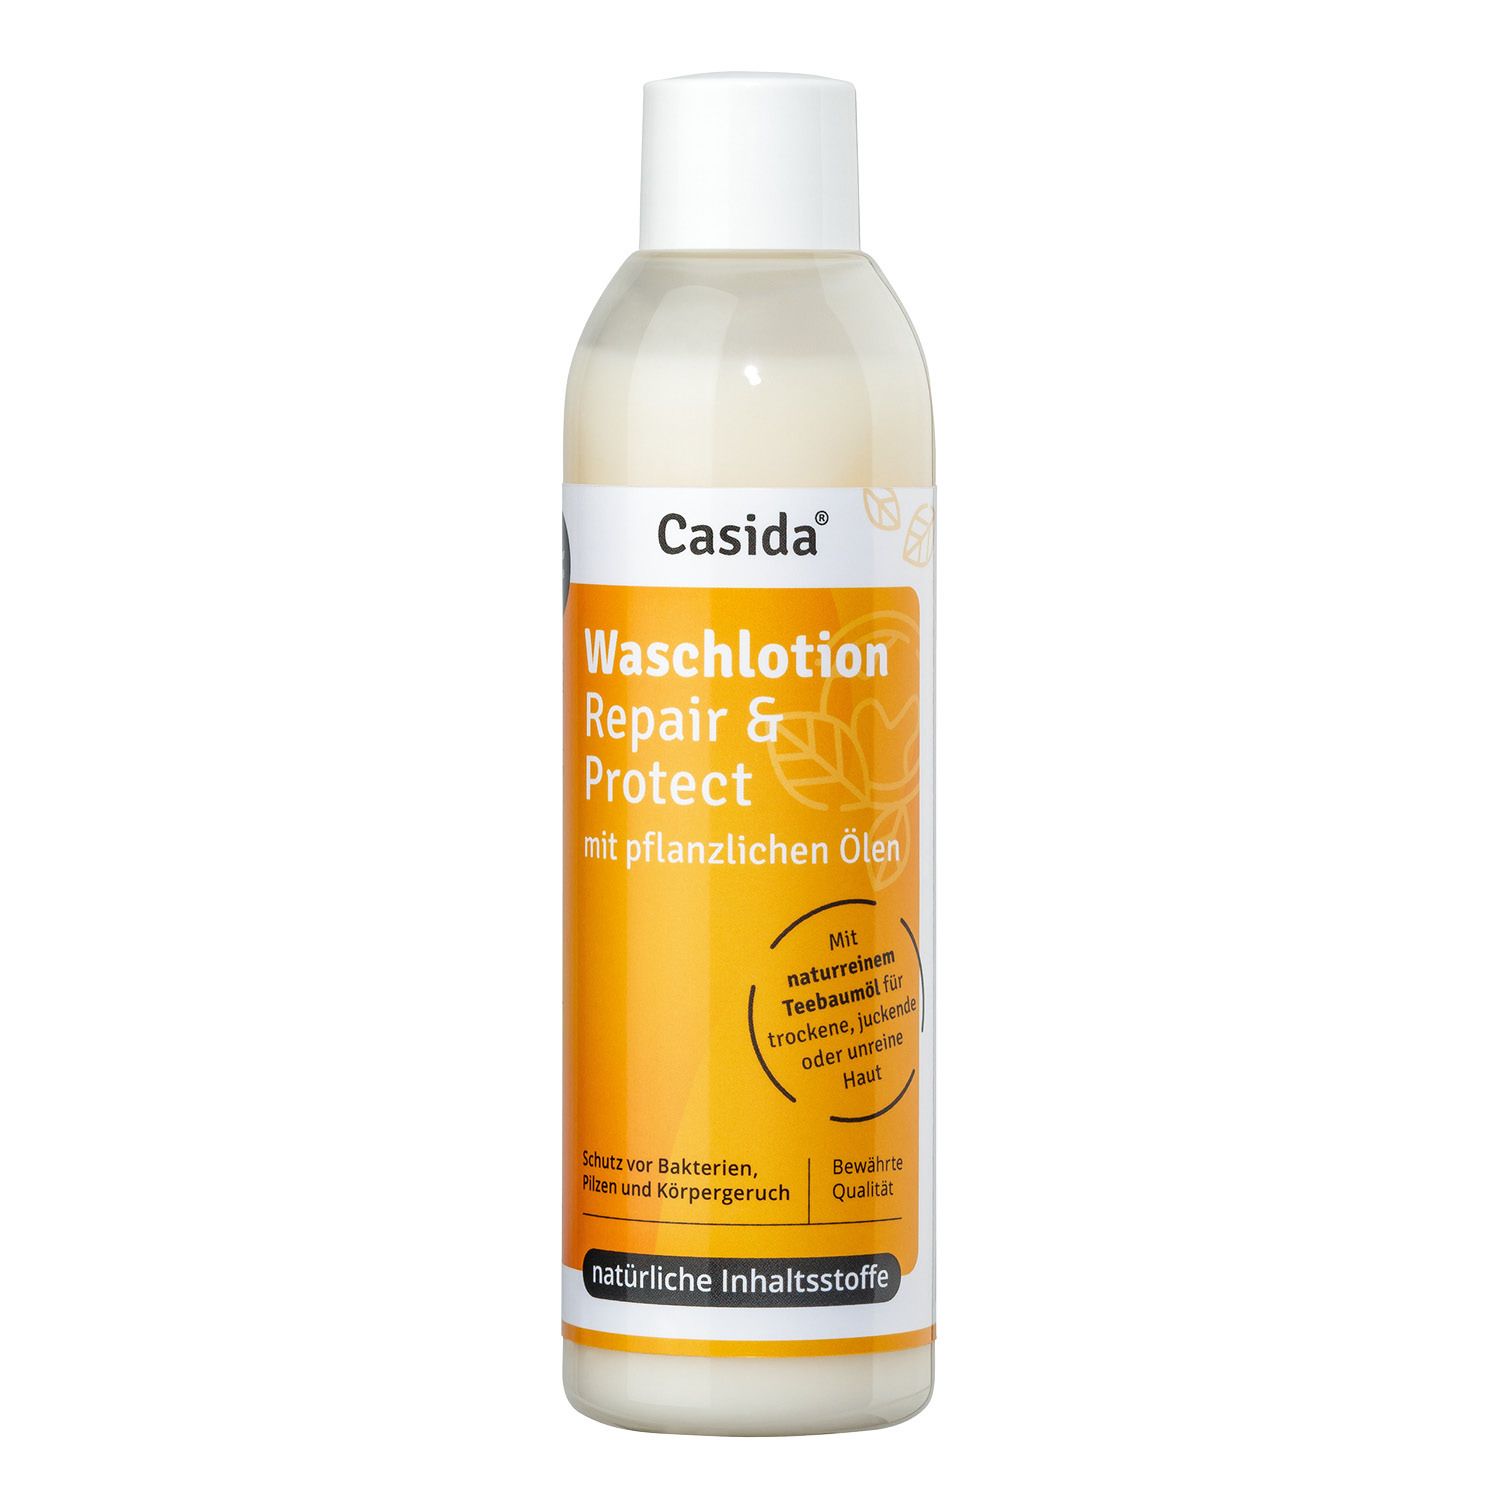 Image of Casida Waschlotion Repair & Protect